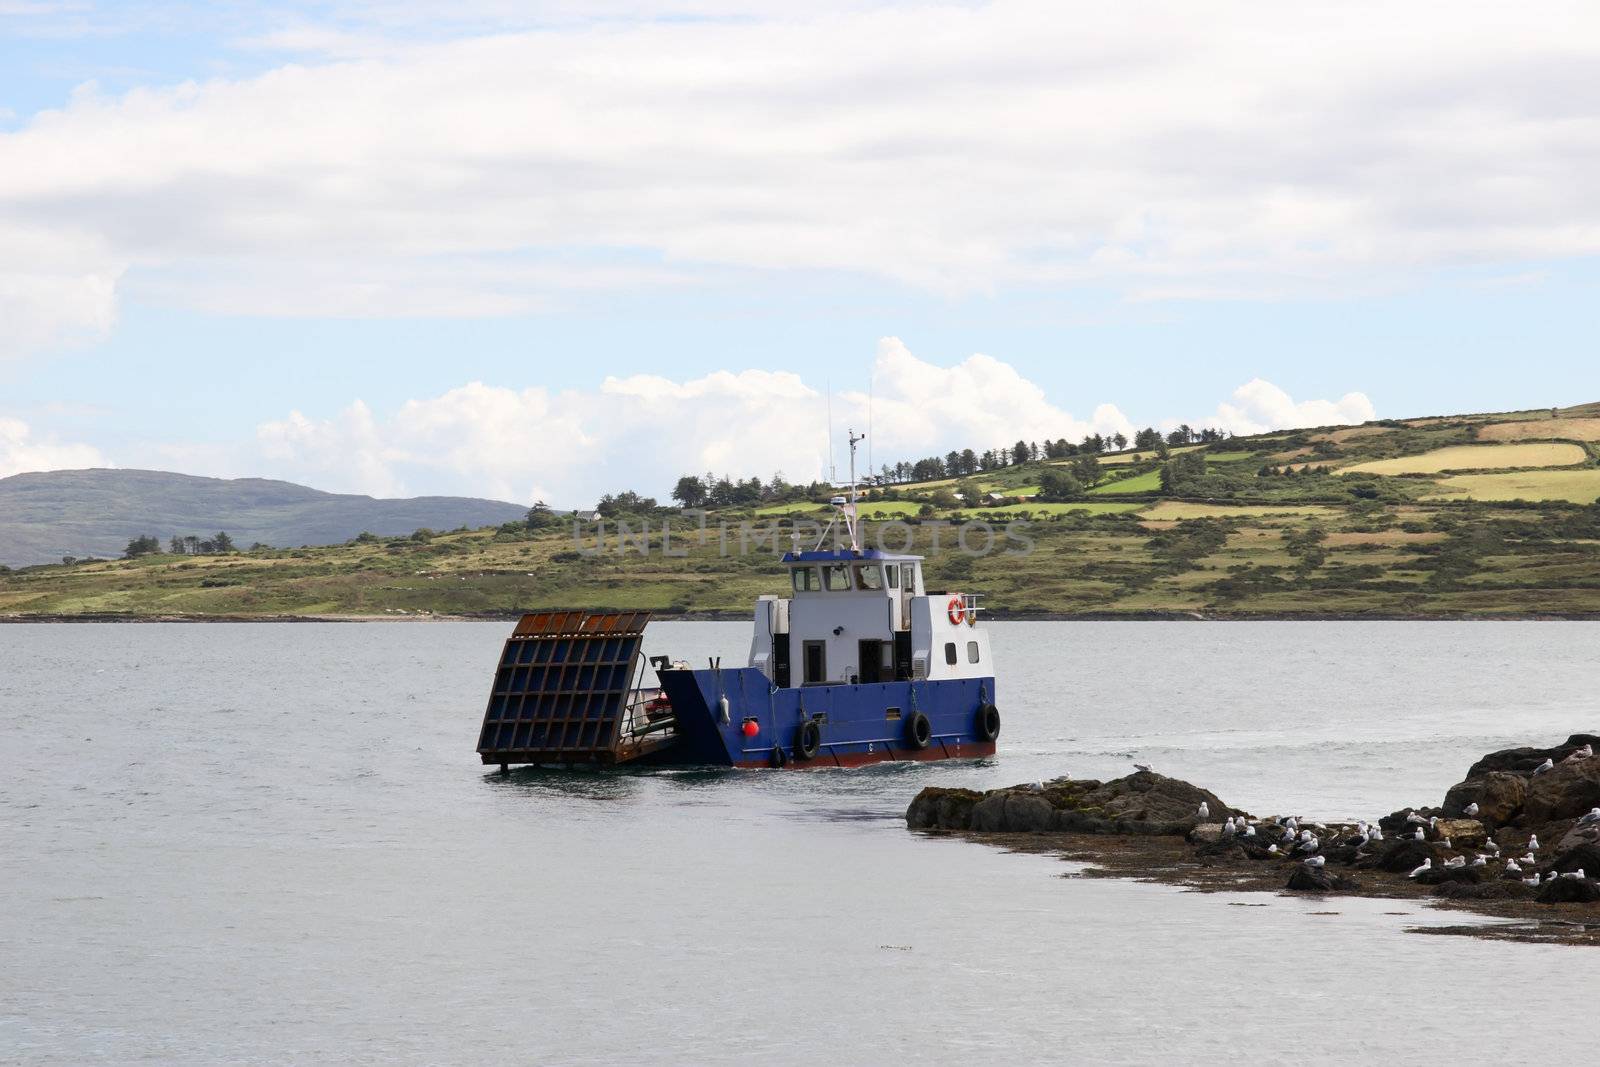 a small island car ferry coming in to dock in county cork ireland